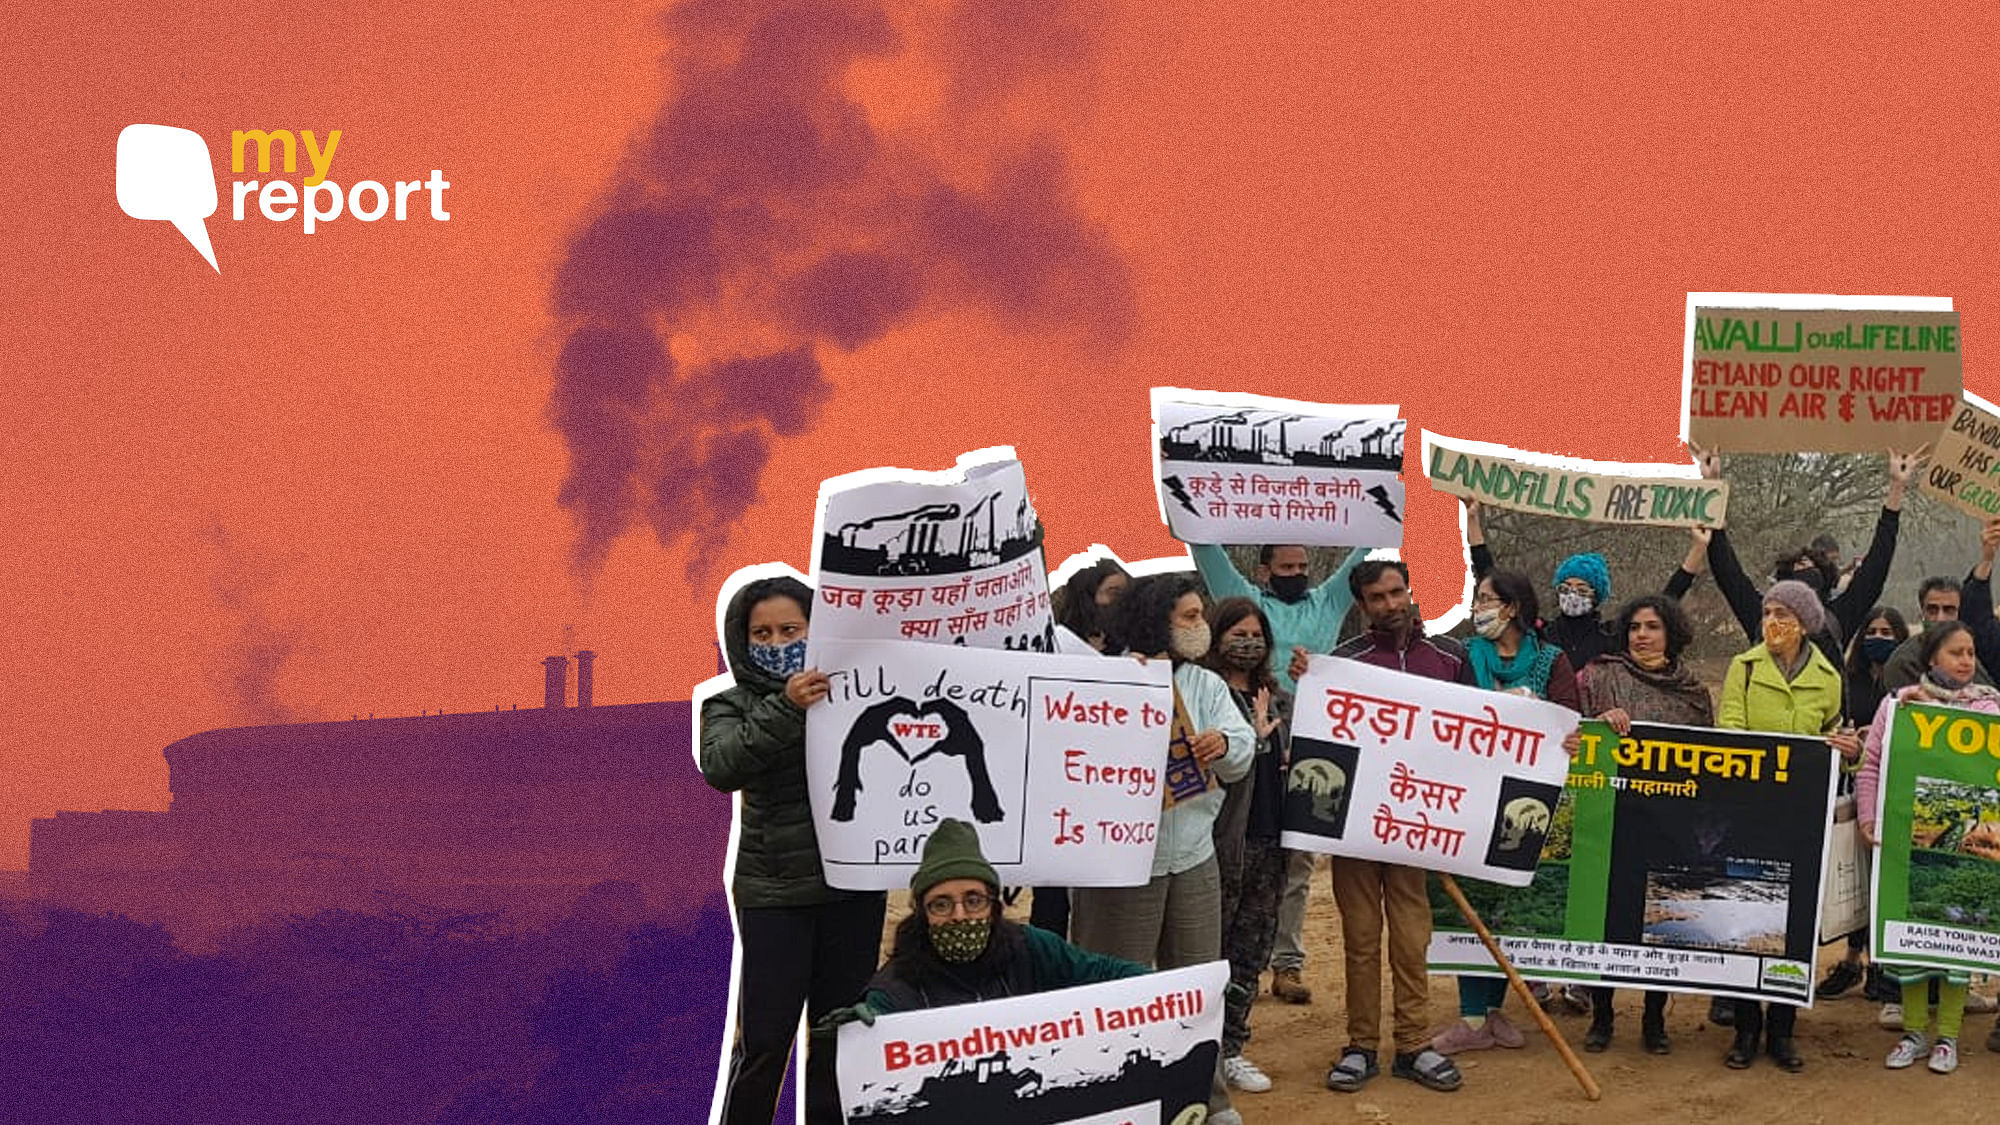 <div class="paragraphs"><p>Residents of Gurugram, Faridabad, Delhi, and villages near the Bandhwari landfill in Haryana are raising objections to the proposed waste to energy plant.</p></div>